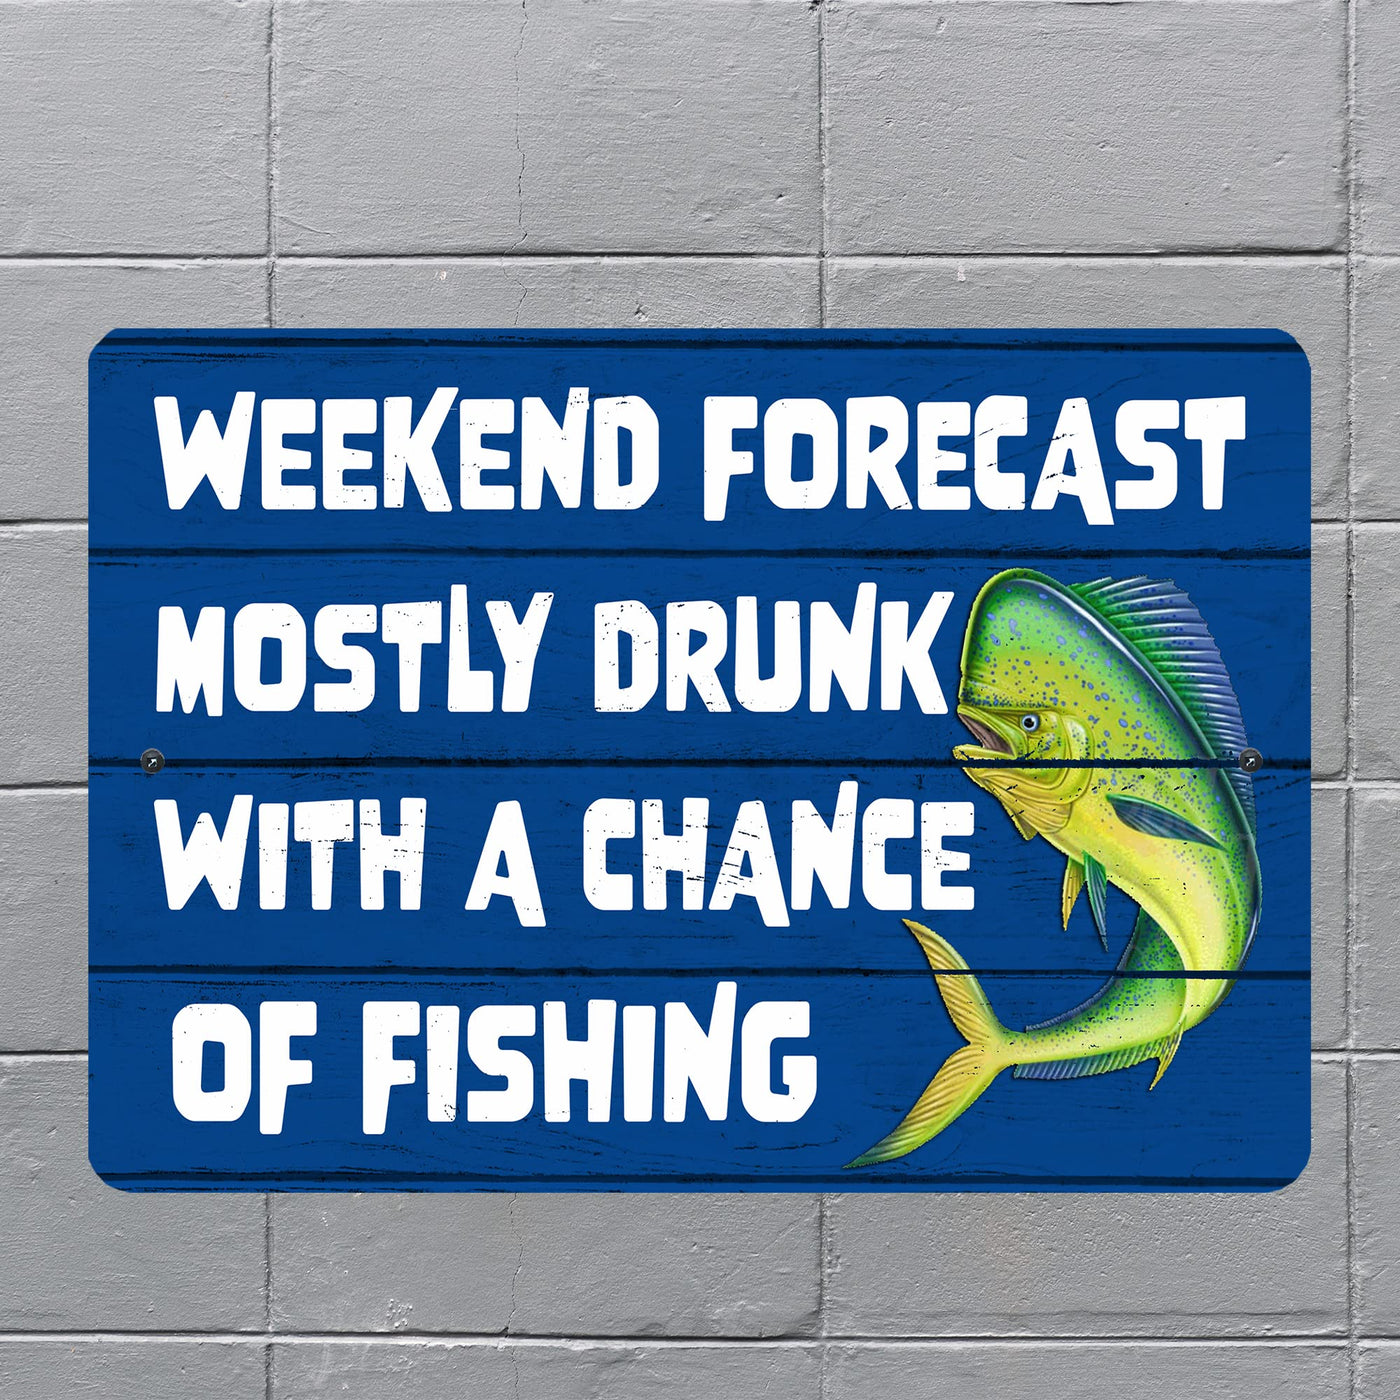 Weekend Forecast-Chance of Fishing Metal Signs Vintage Wall Art -12 x 8" Funny Rustic Outdoor Fish Sign for Lake, Patio, Camp, Lodge - Tin Sign Decor for Home-Cabin-Fish Themed Accessories & Gifts!